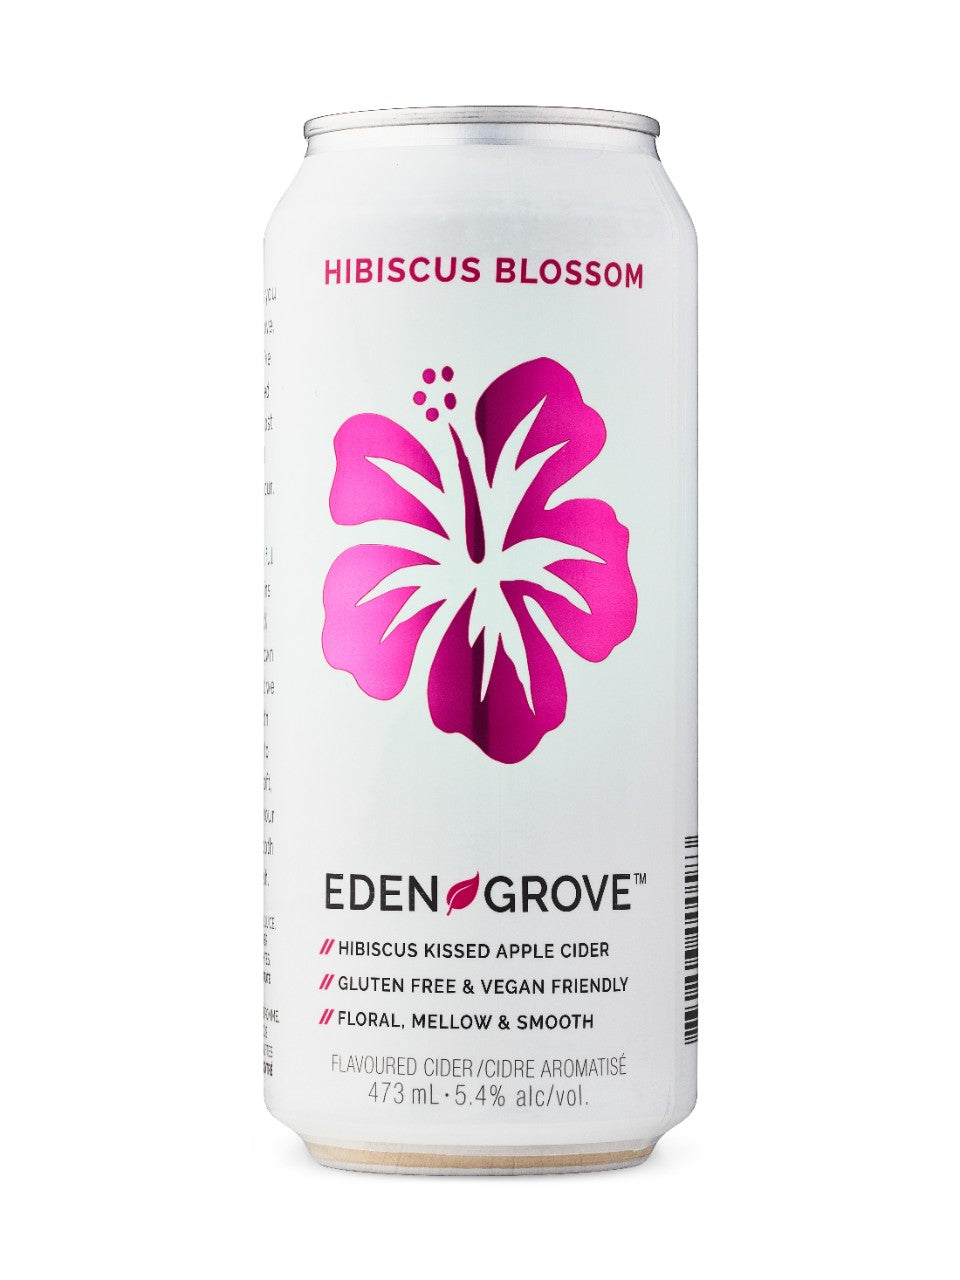 Eden Grove Hibiscus Blossom Cider 473 mL can